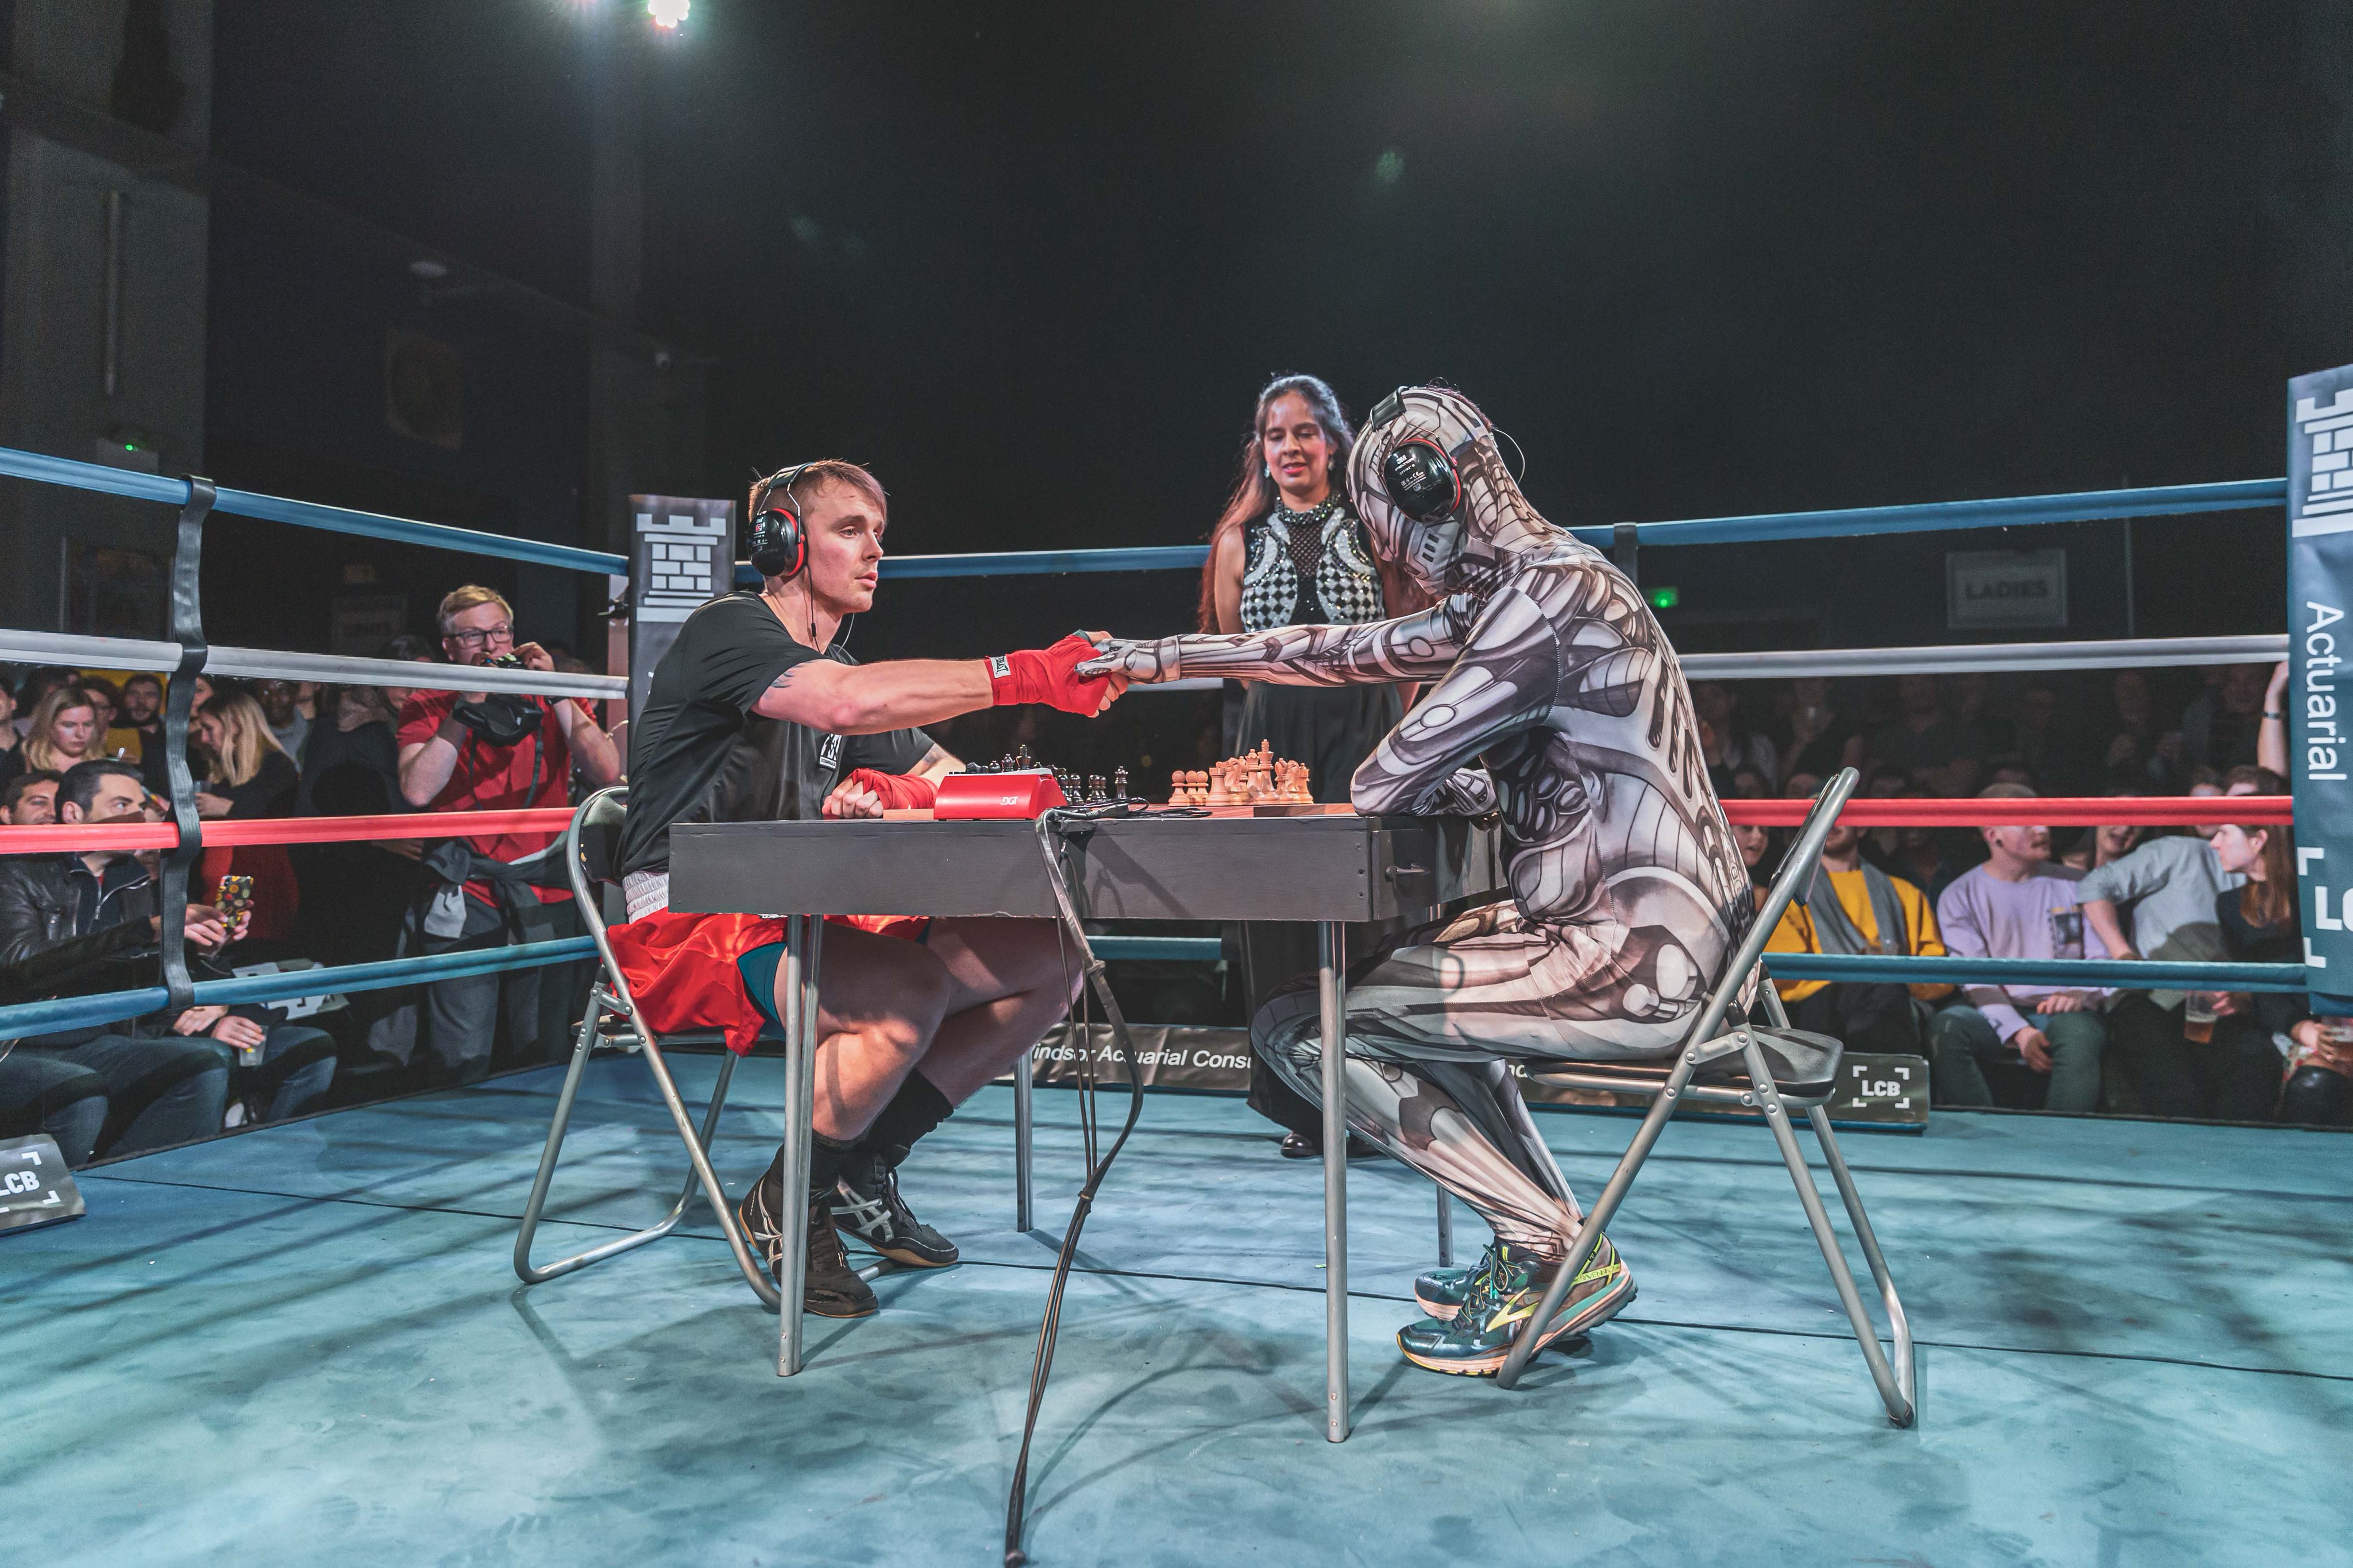 Chessboxing Nation on X: The Artificial Irishman, Toto the #Robot sits  down opposite his human opponent ahead of his first #Chessboxing fight.  Will #AI ever be able to compete at Chessboxing? @hardmaru @